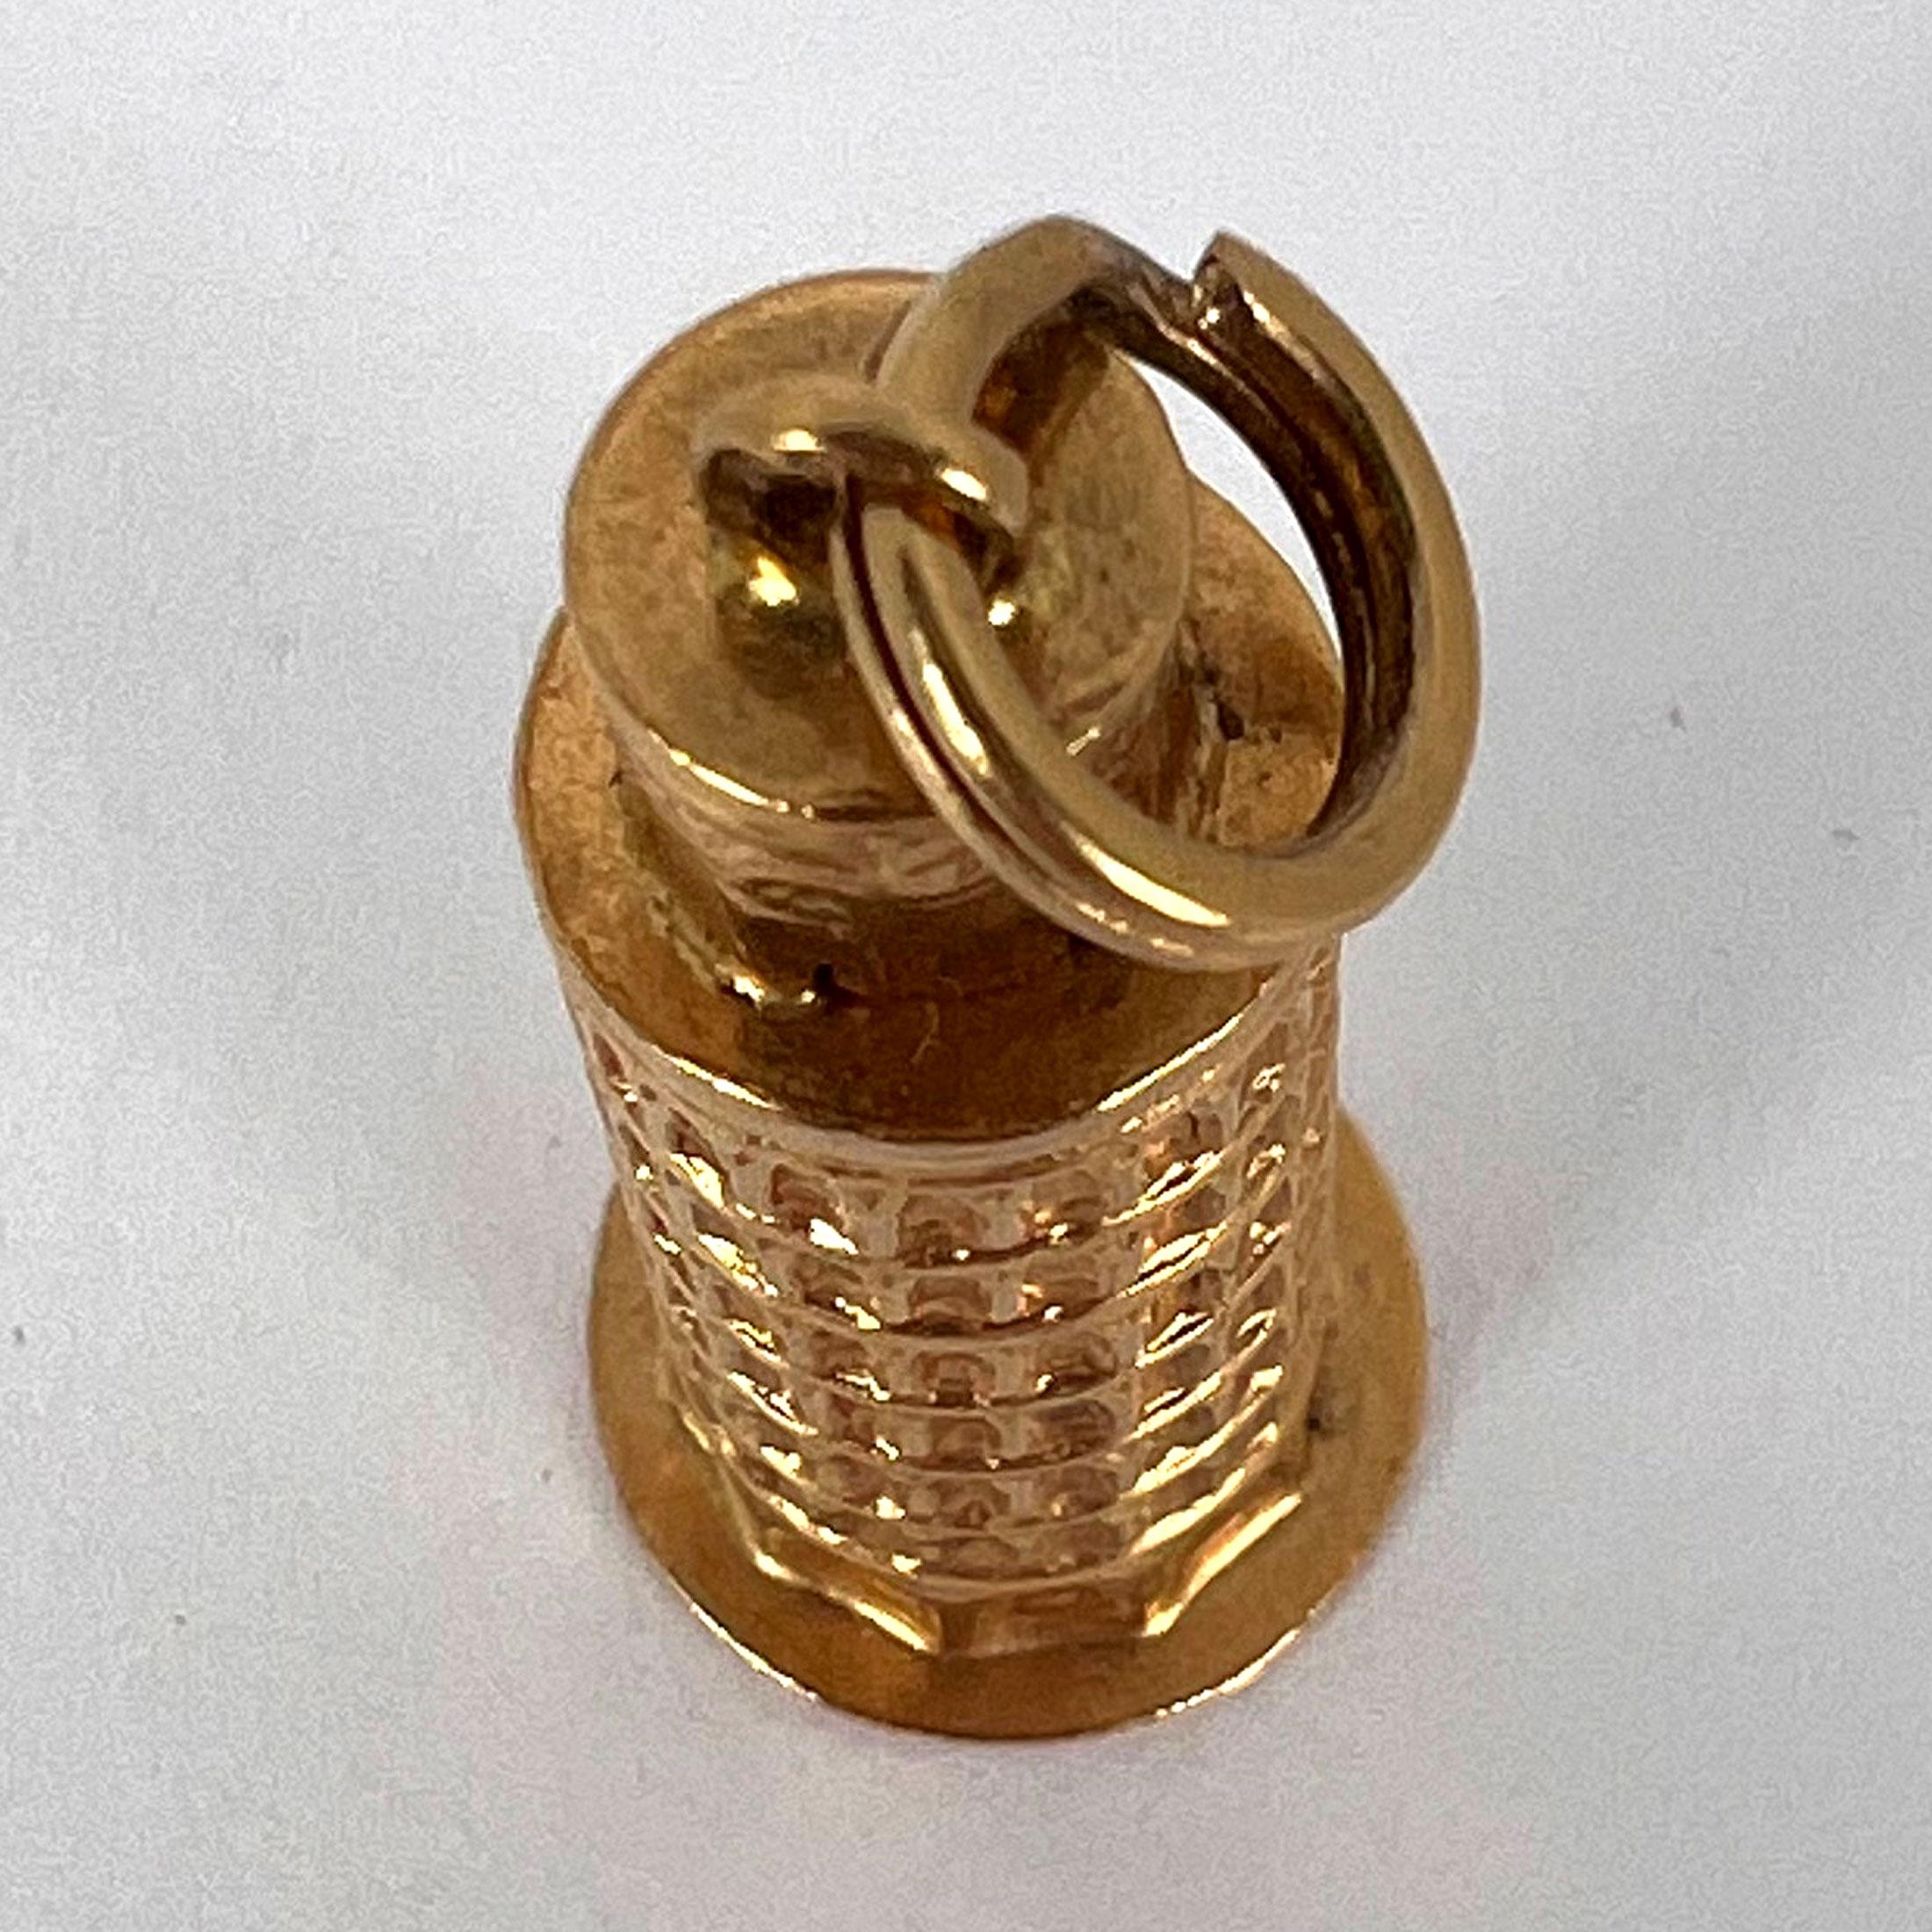 Italian Leaning Tower of Pisa 18K Yellow Gold Charm Pendant For Sale 9